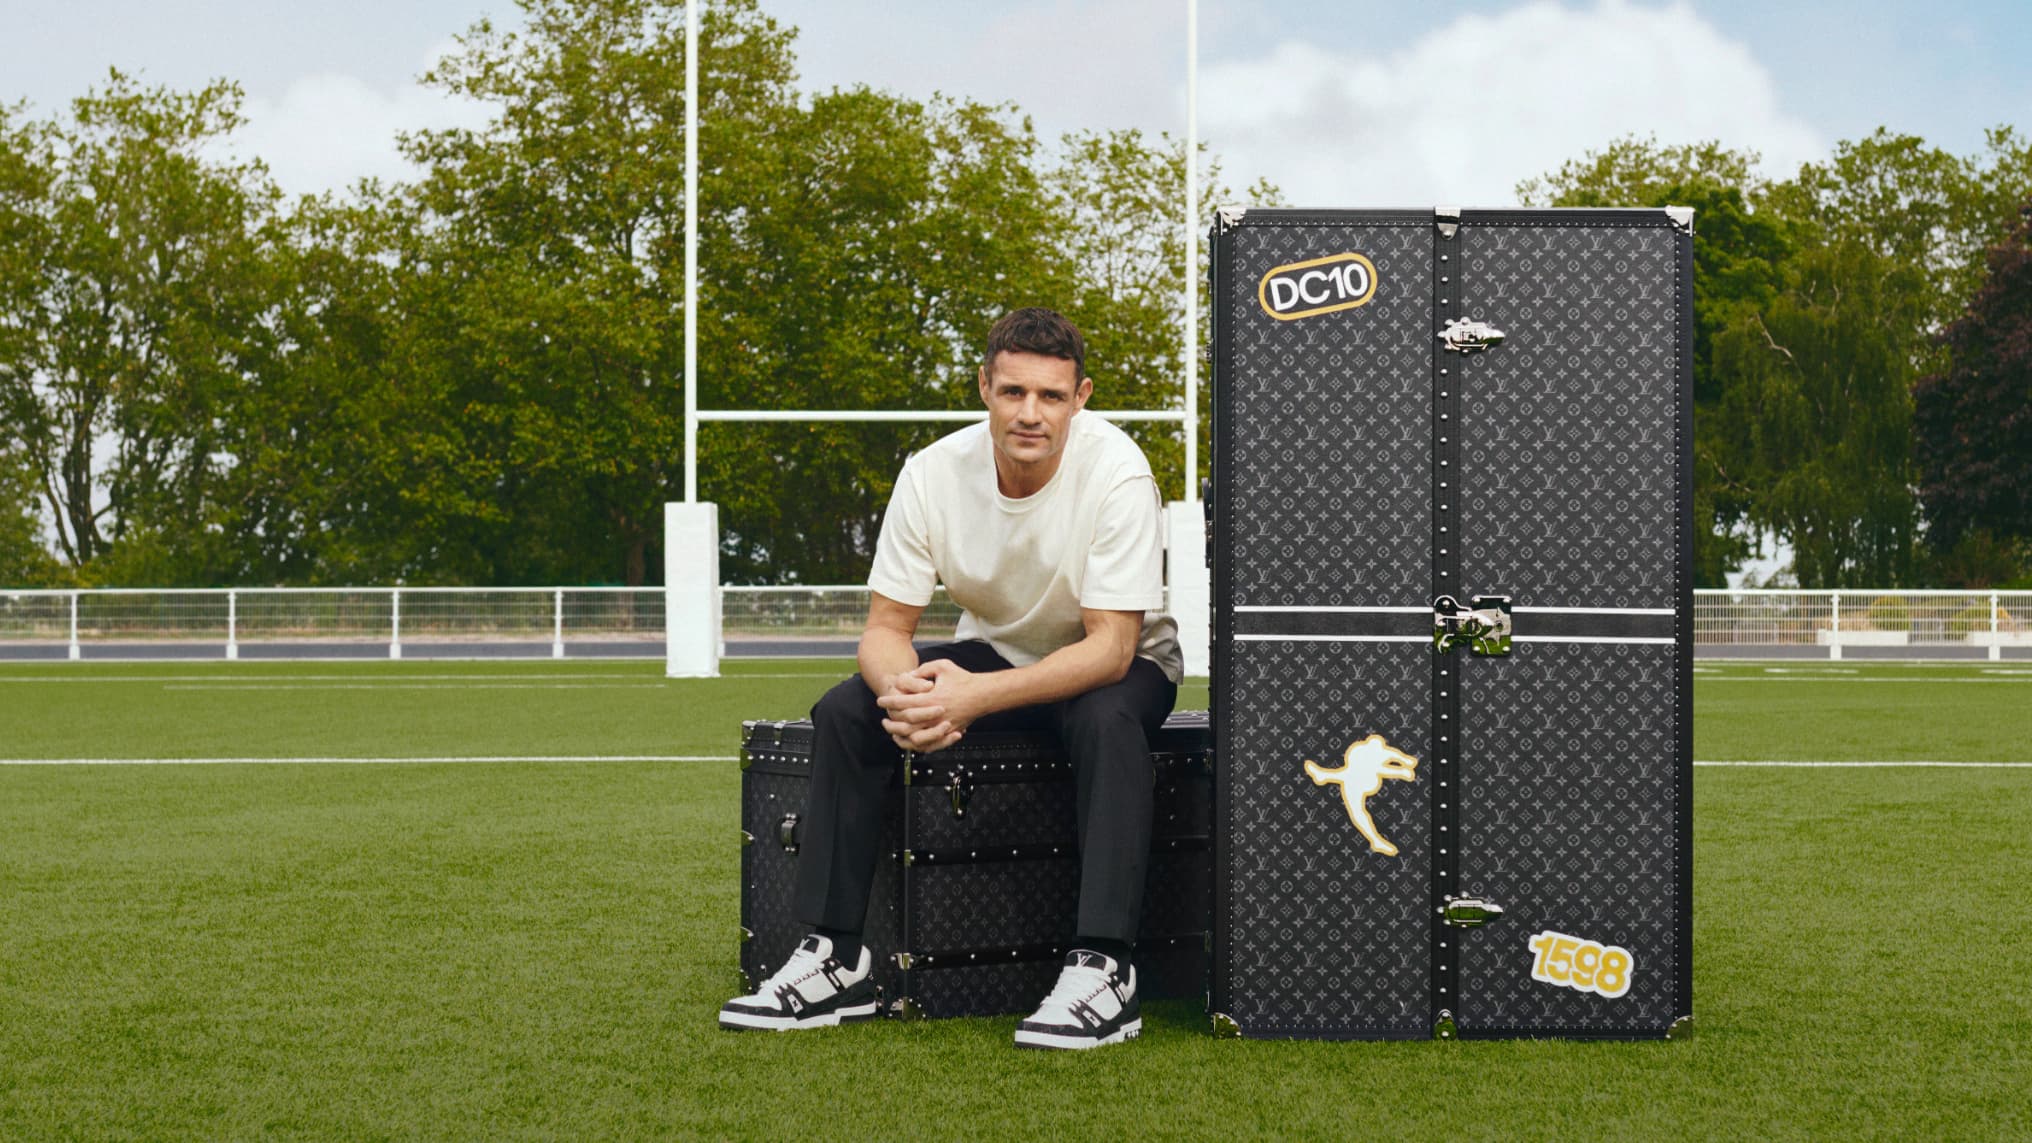 Deluxe rugby set by Louis Vuitton designer and athlete Dan Carter